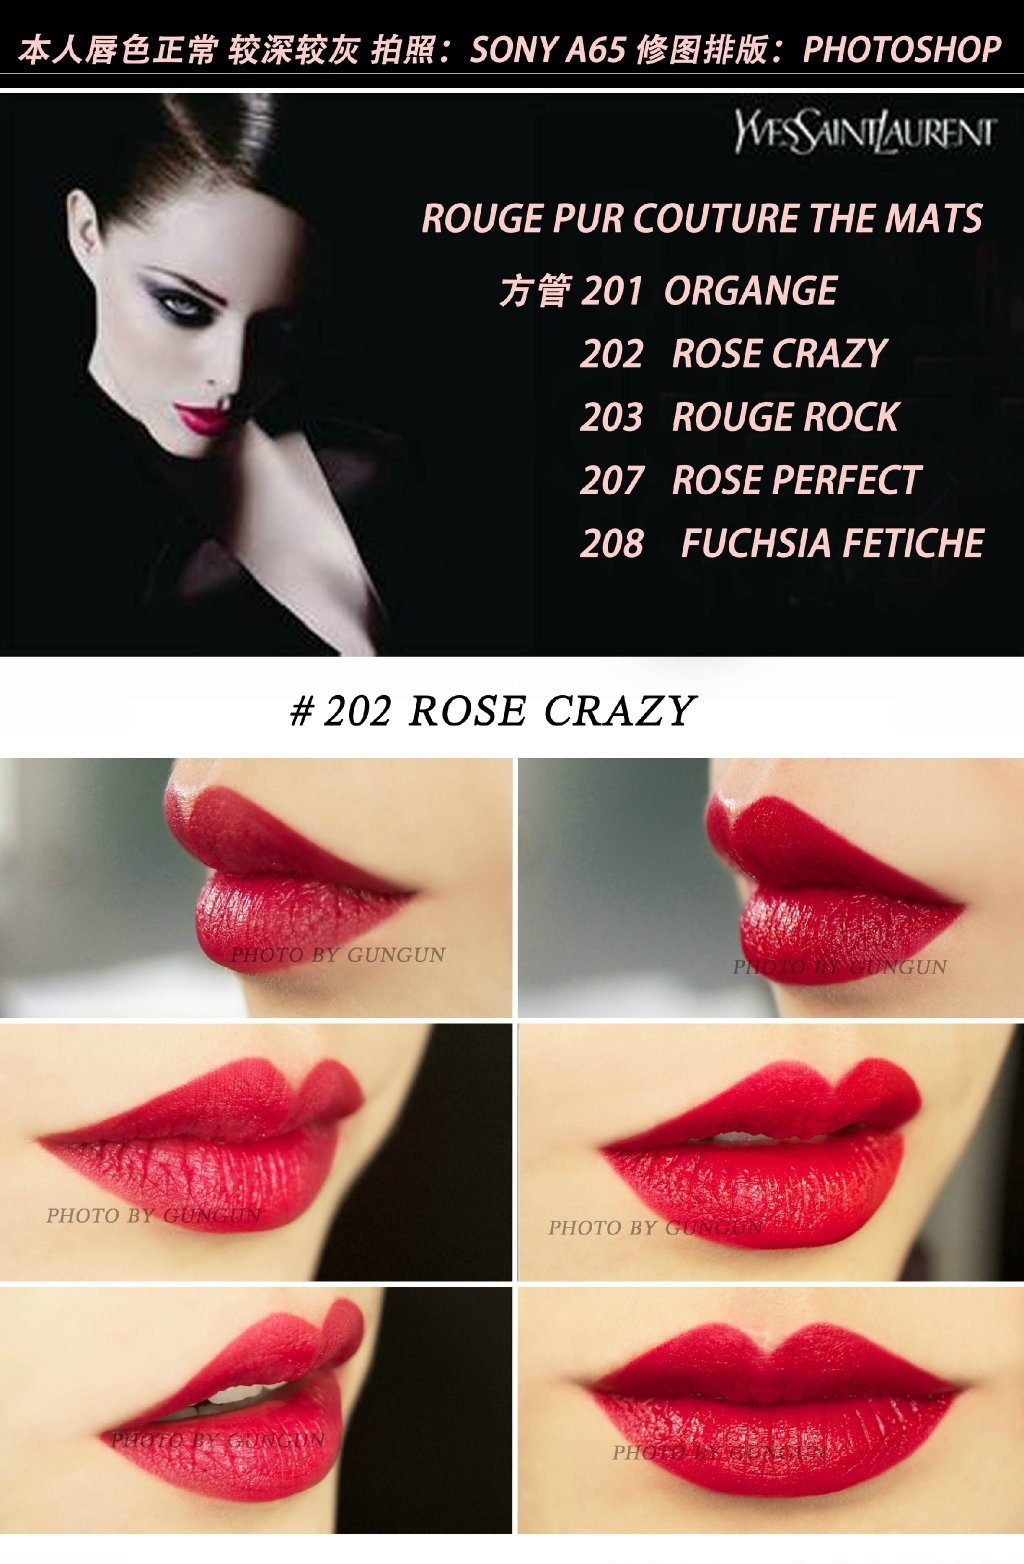 ysl rouge pur couture the mats 方管唇膏201/202/203/207/208试色